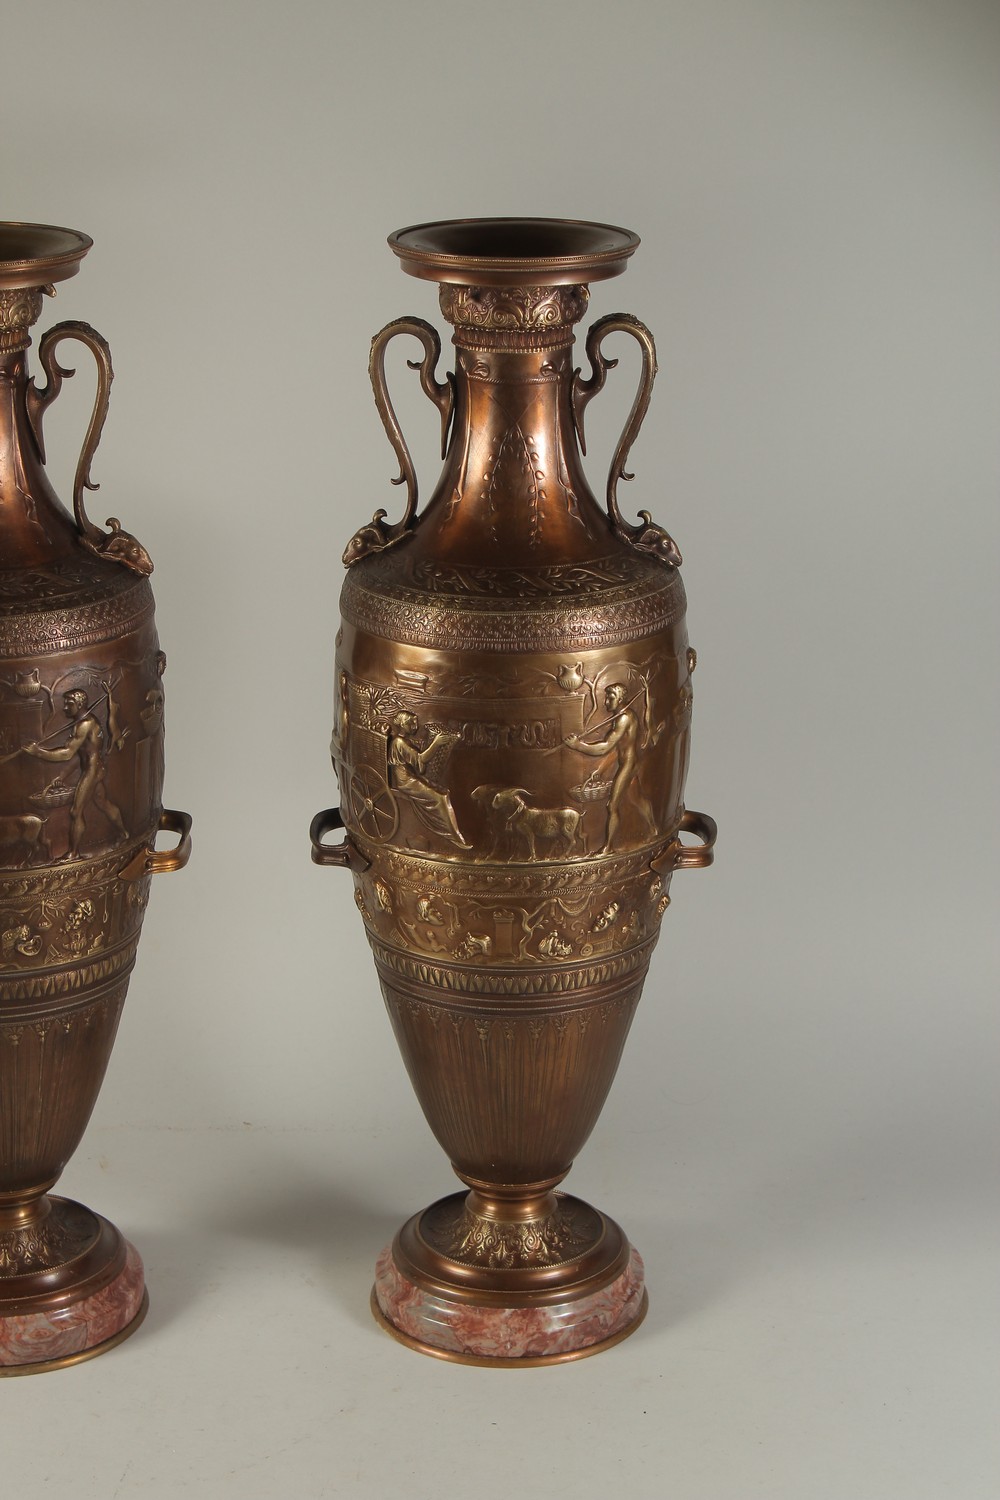 A SUPERB PAIR OF TWO-HANDLED CLASSICAL BRONZE URNS decorated with panels of classical figures. - Image 3 of 4